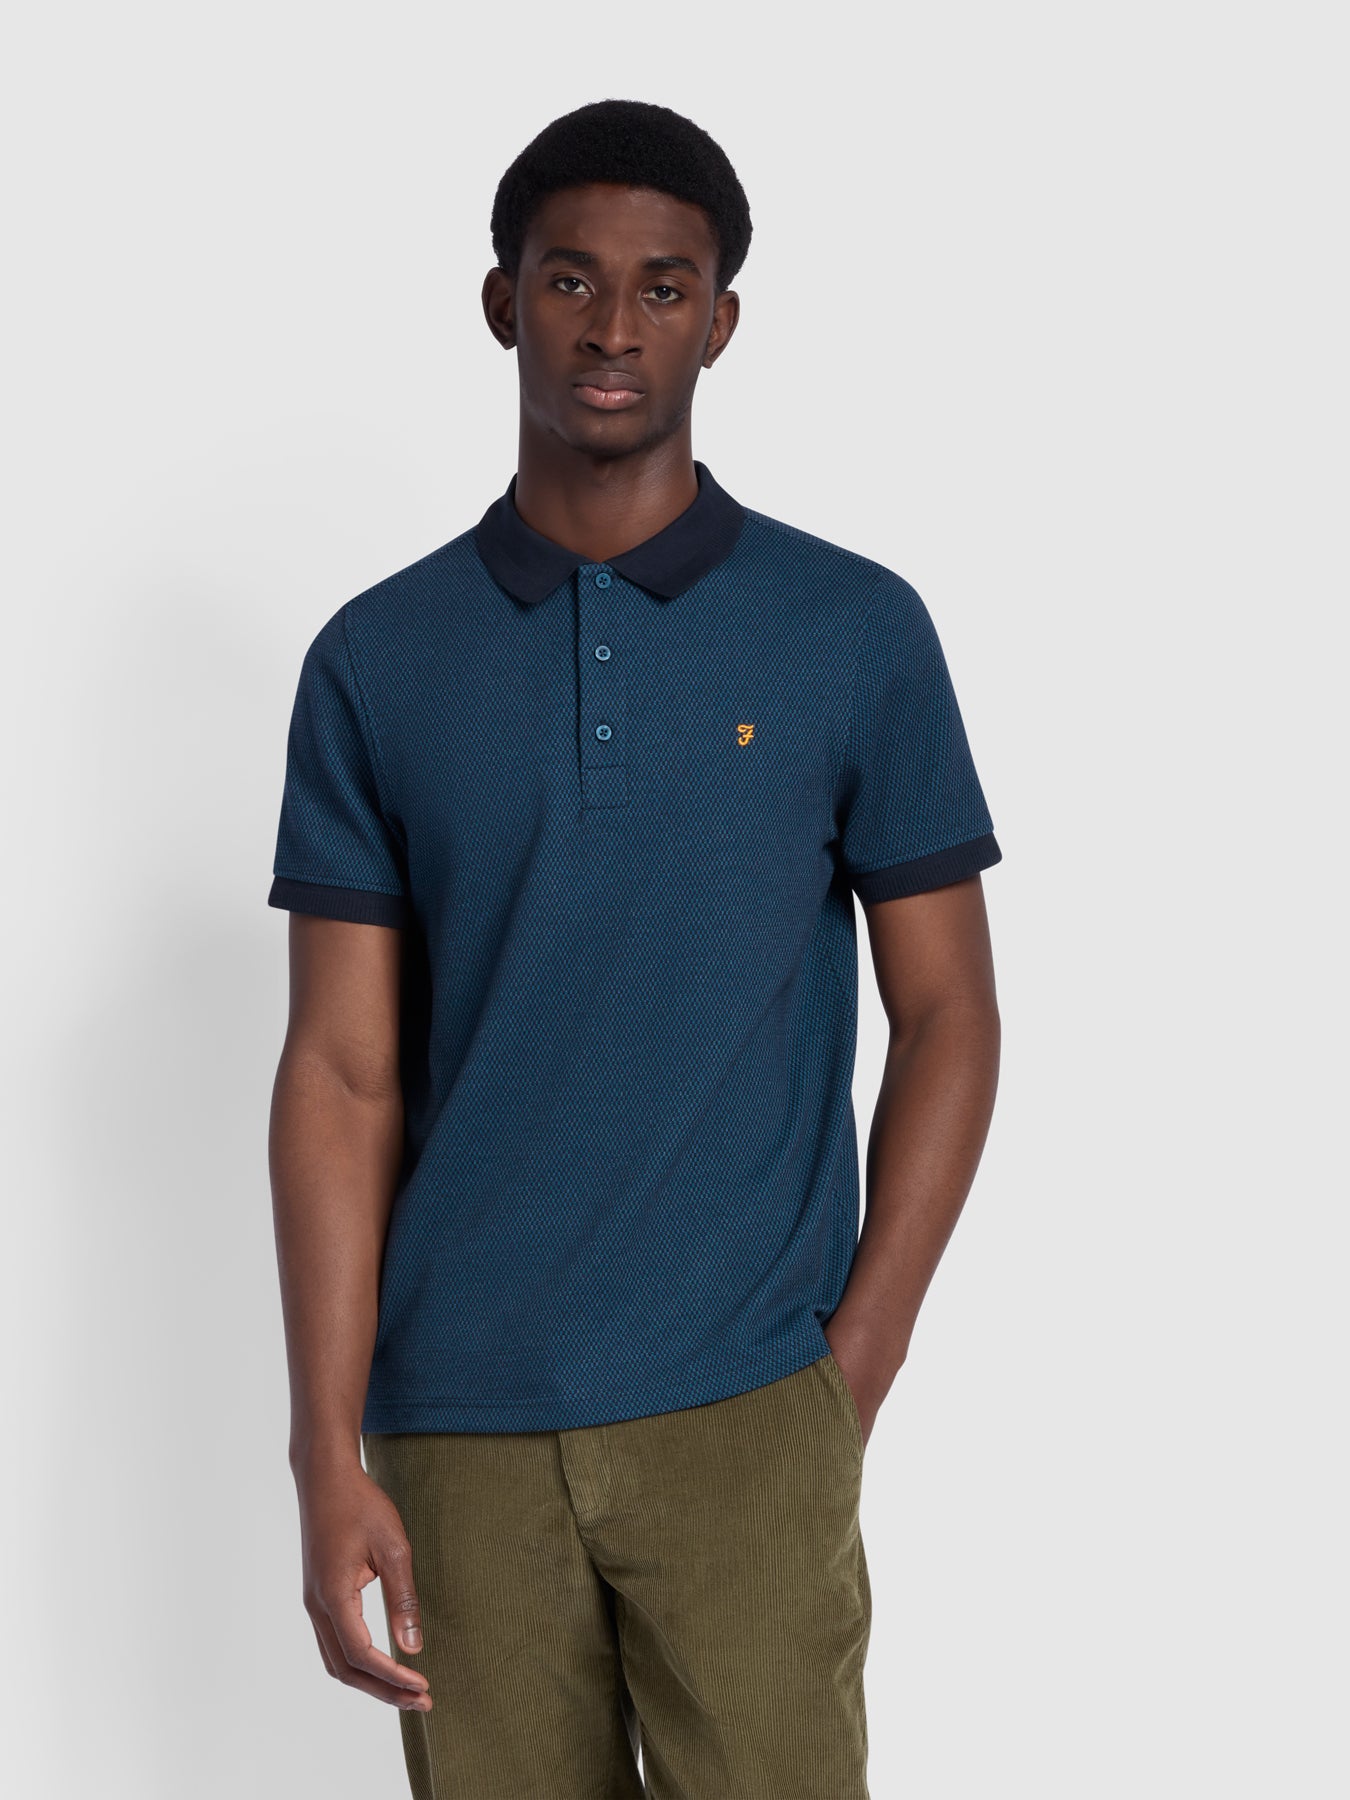 View Como Regular Fit Micro Check Tipped Polo Shirt In Sailor Blue information